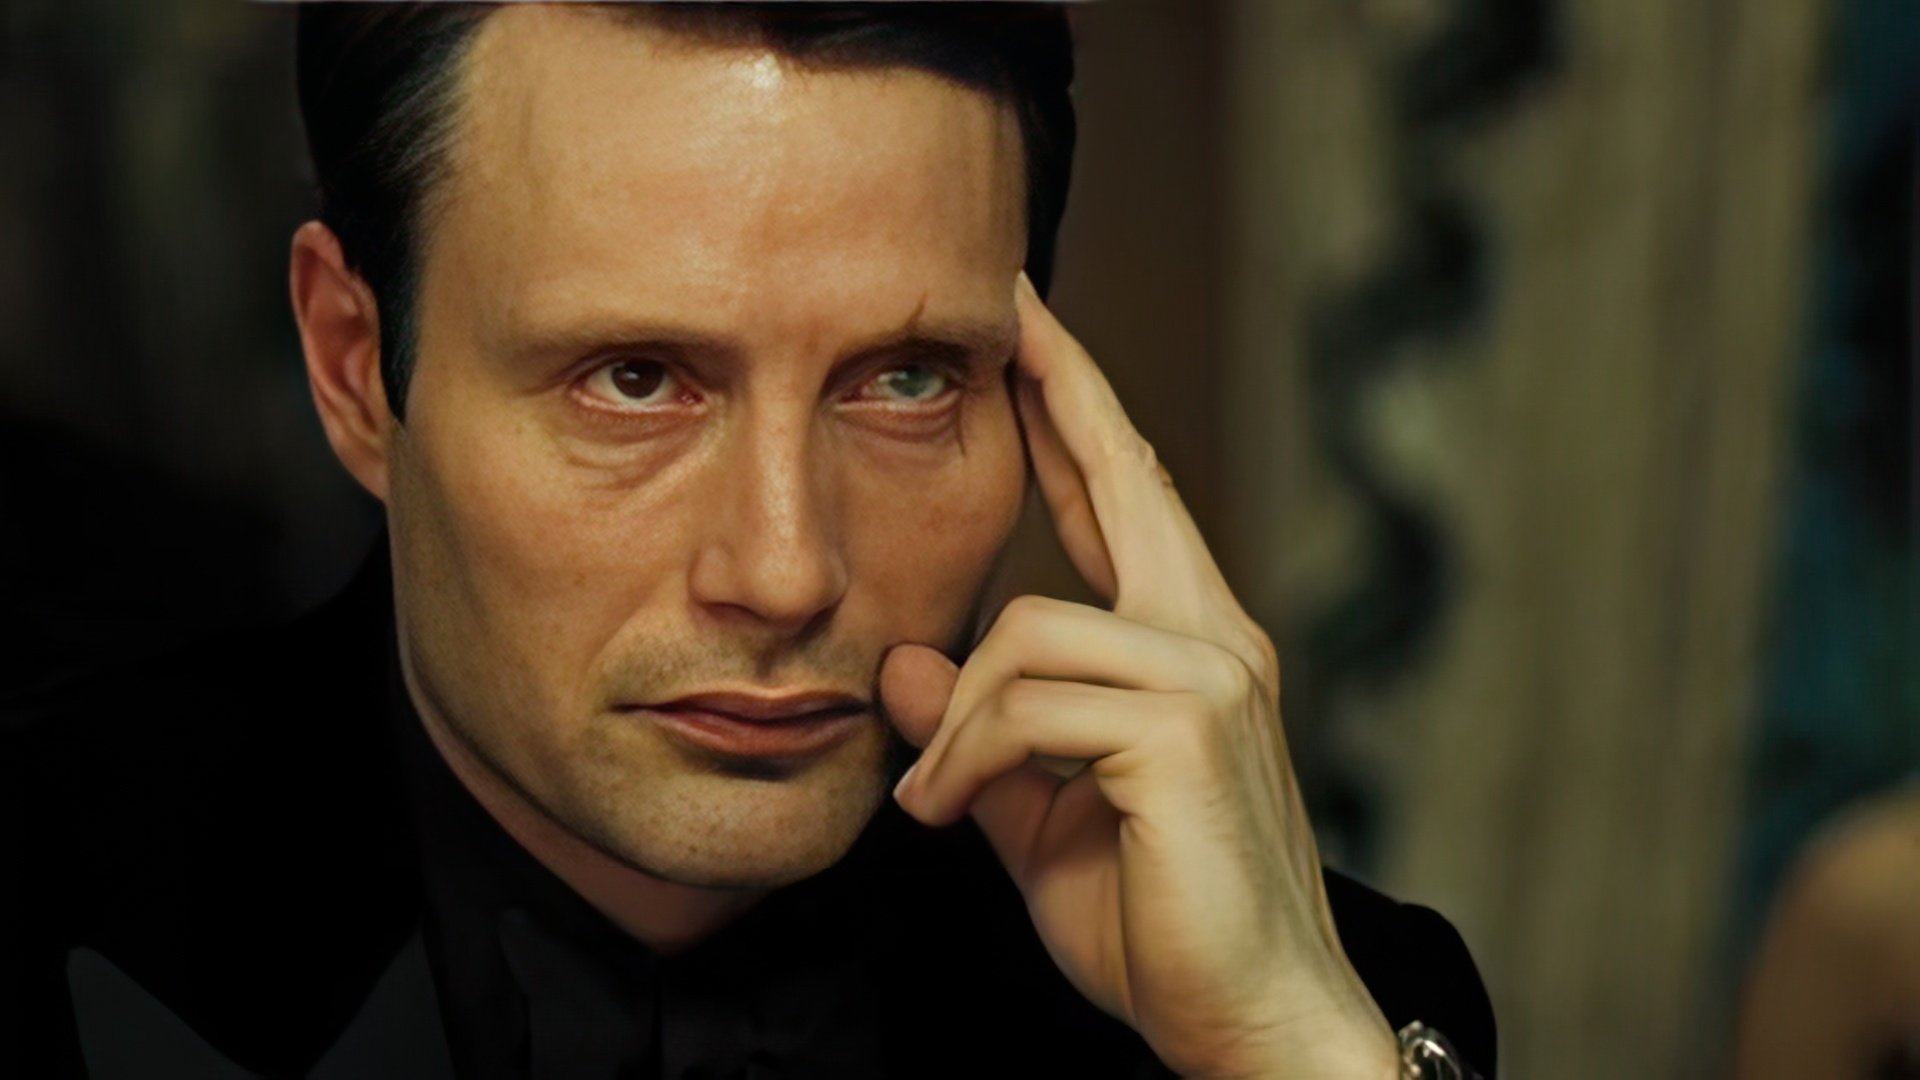 Casino Royale: Mads Mikkelsen as Le Chiffre